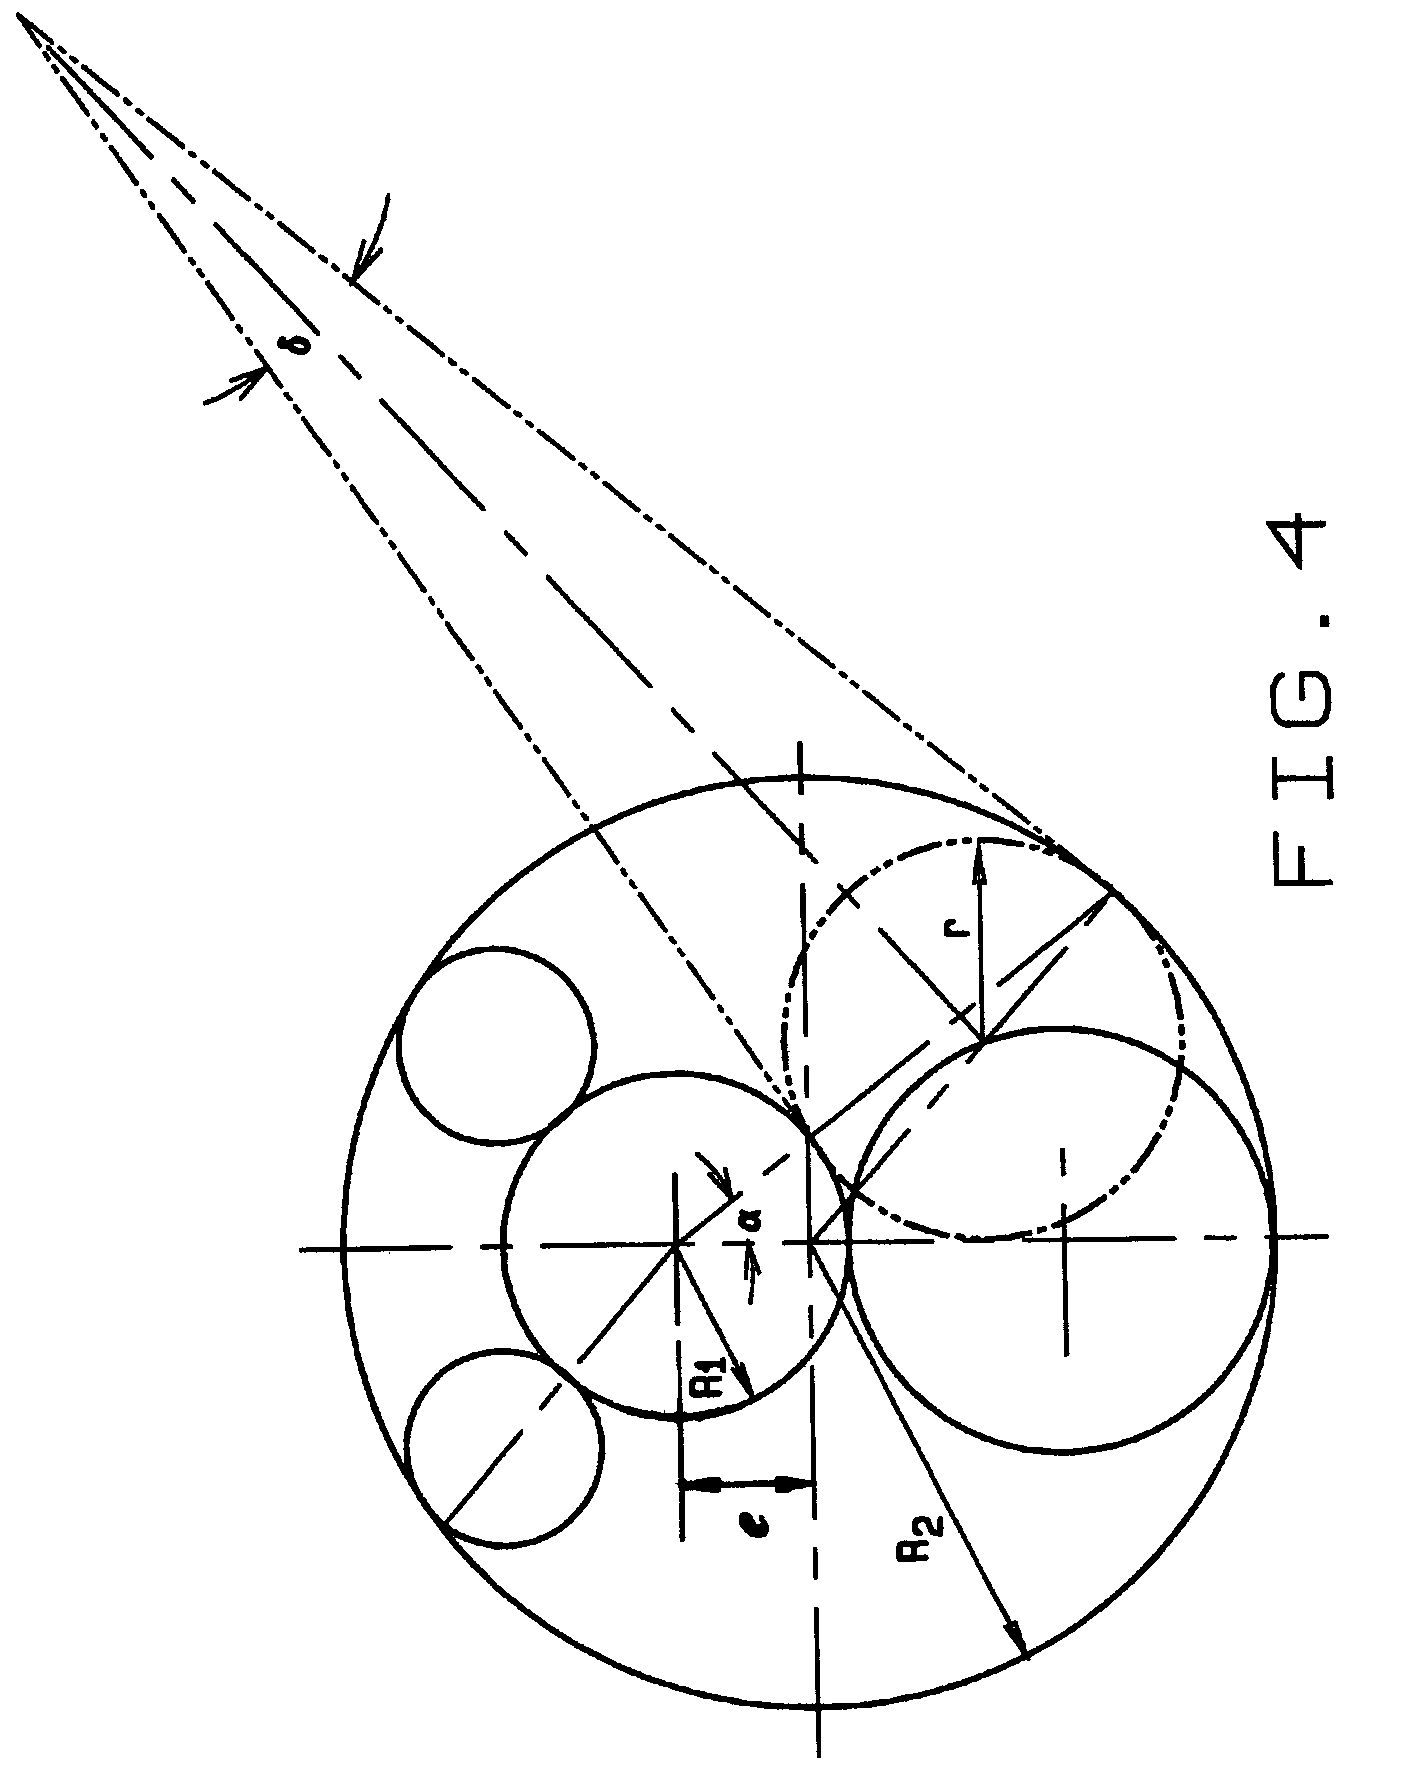 Wedge loading mechanism for traction drives